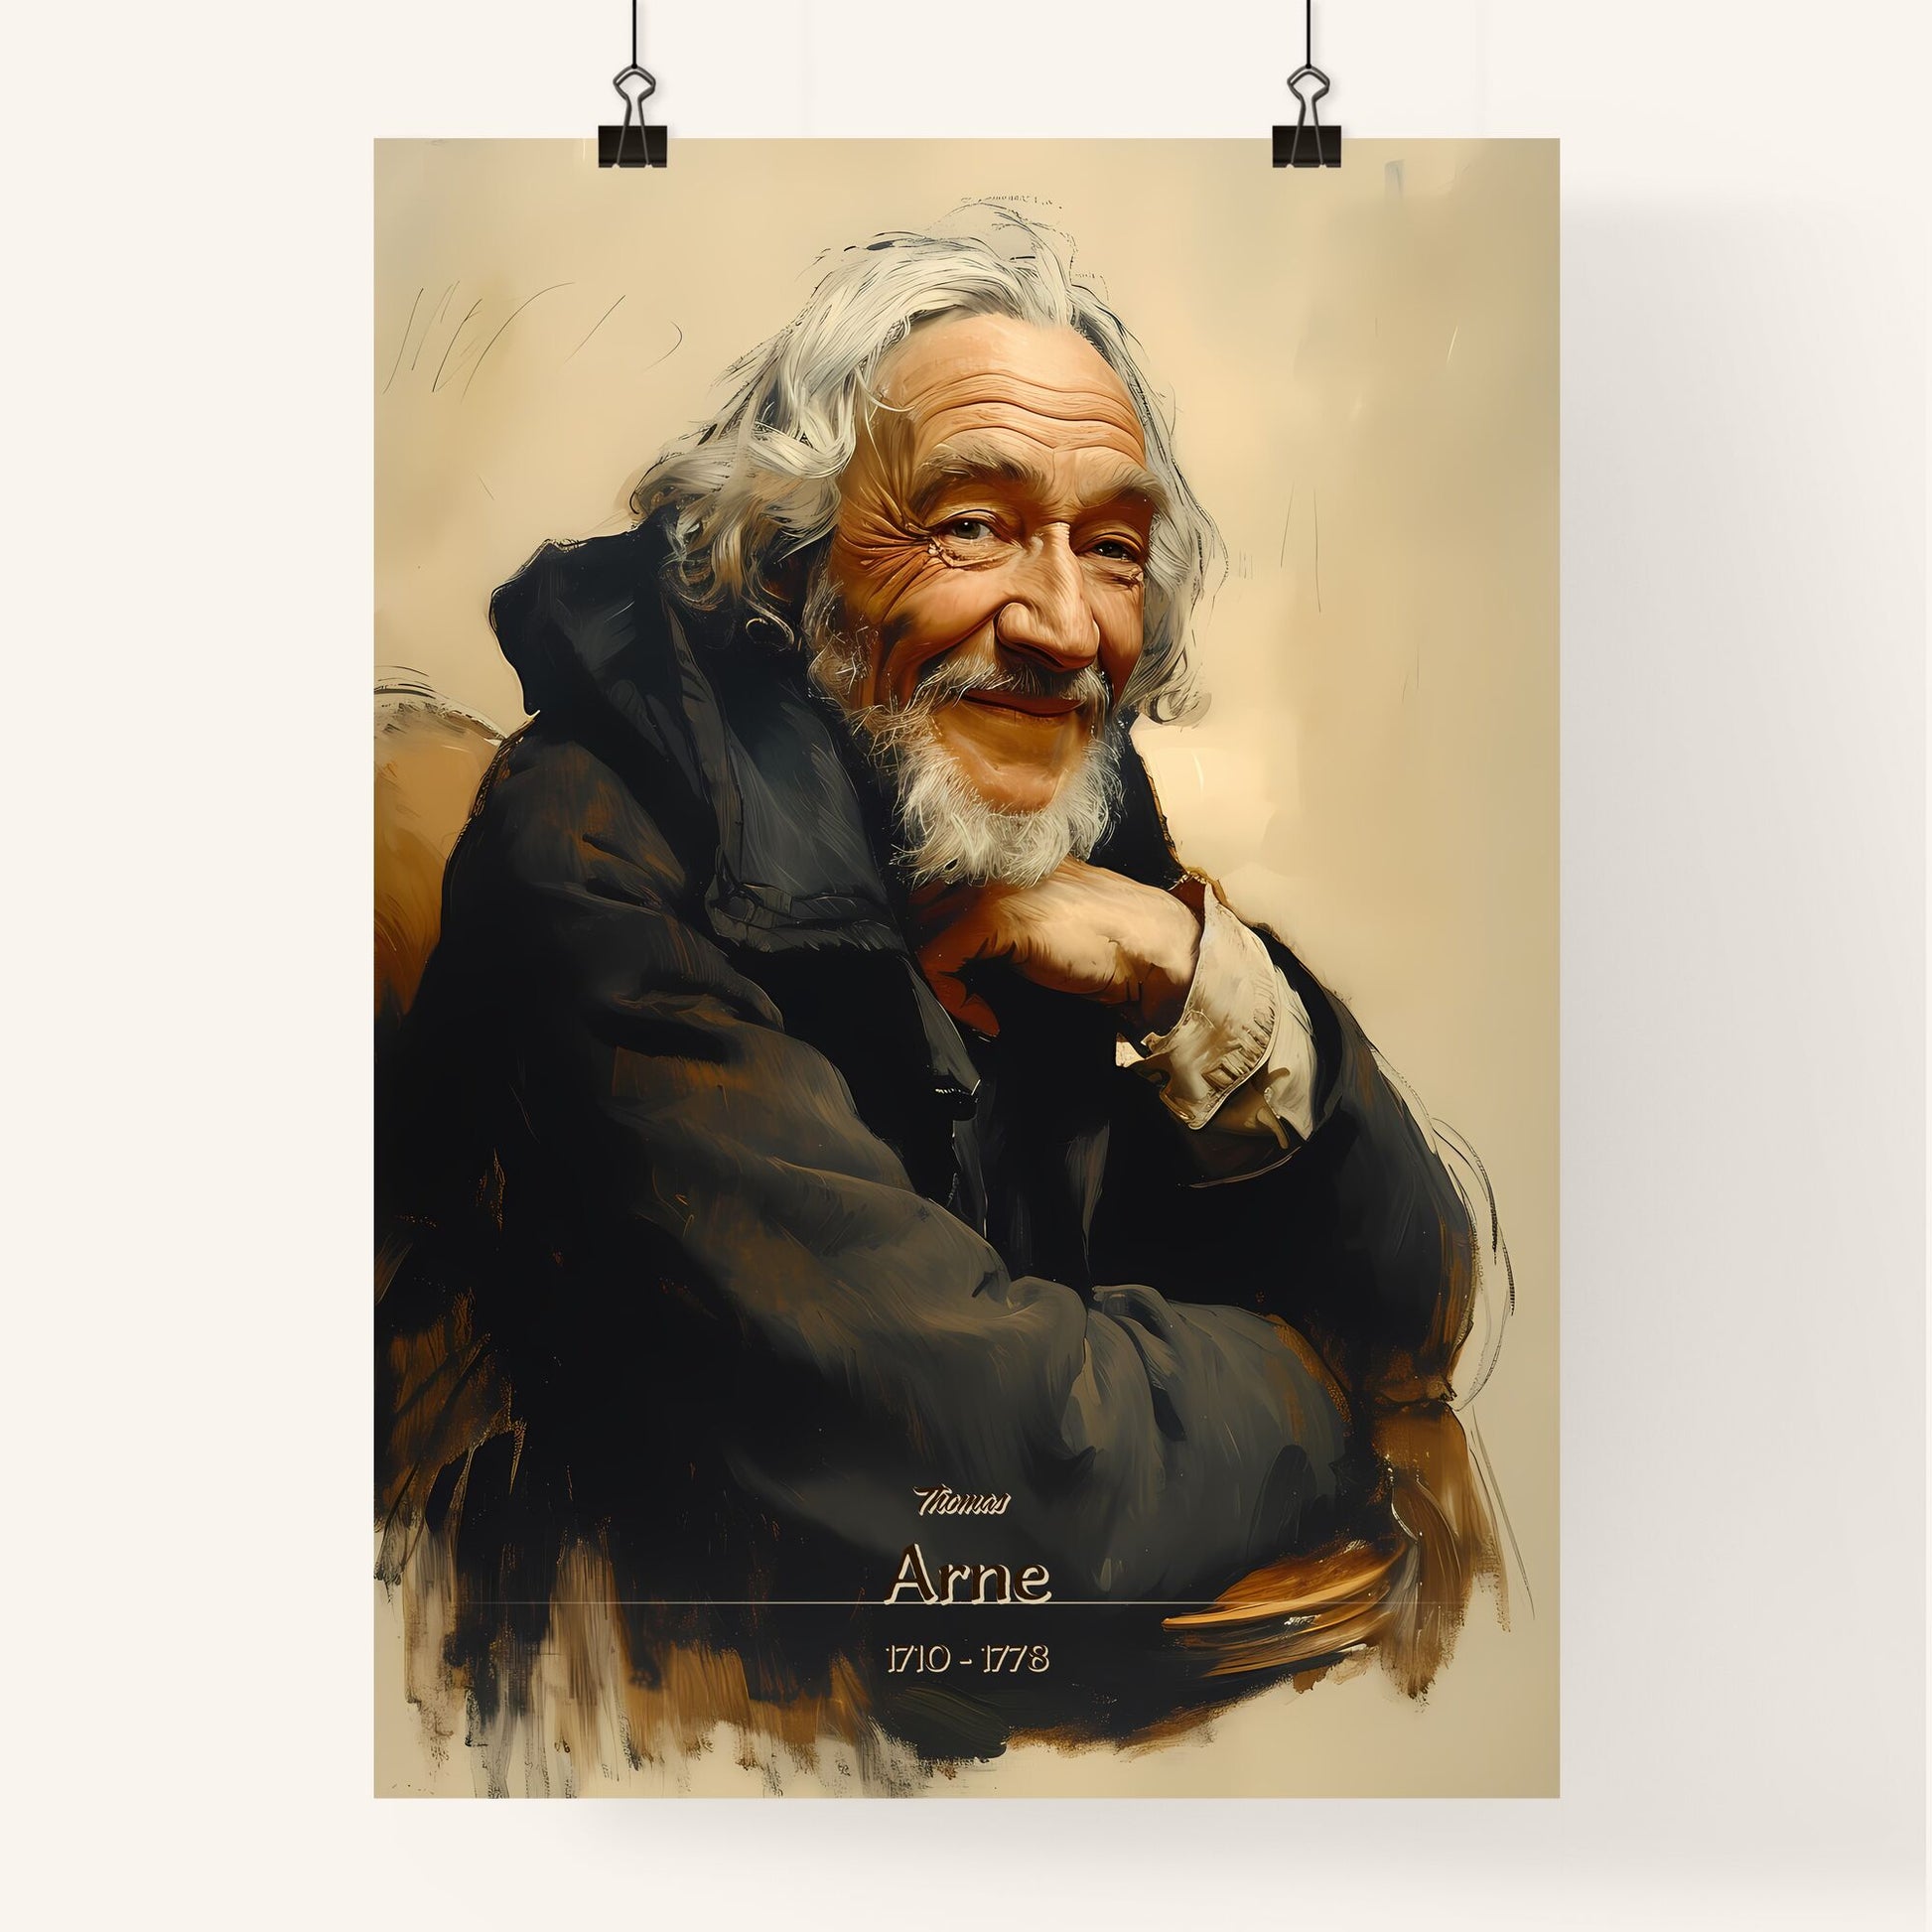 Thomas, Arne, 1710 - 1778, A Poster of a man with a beard and a black coat Default Title